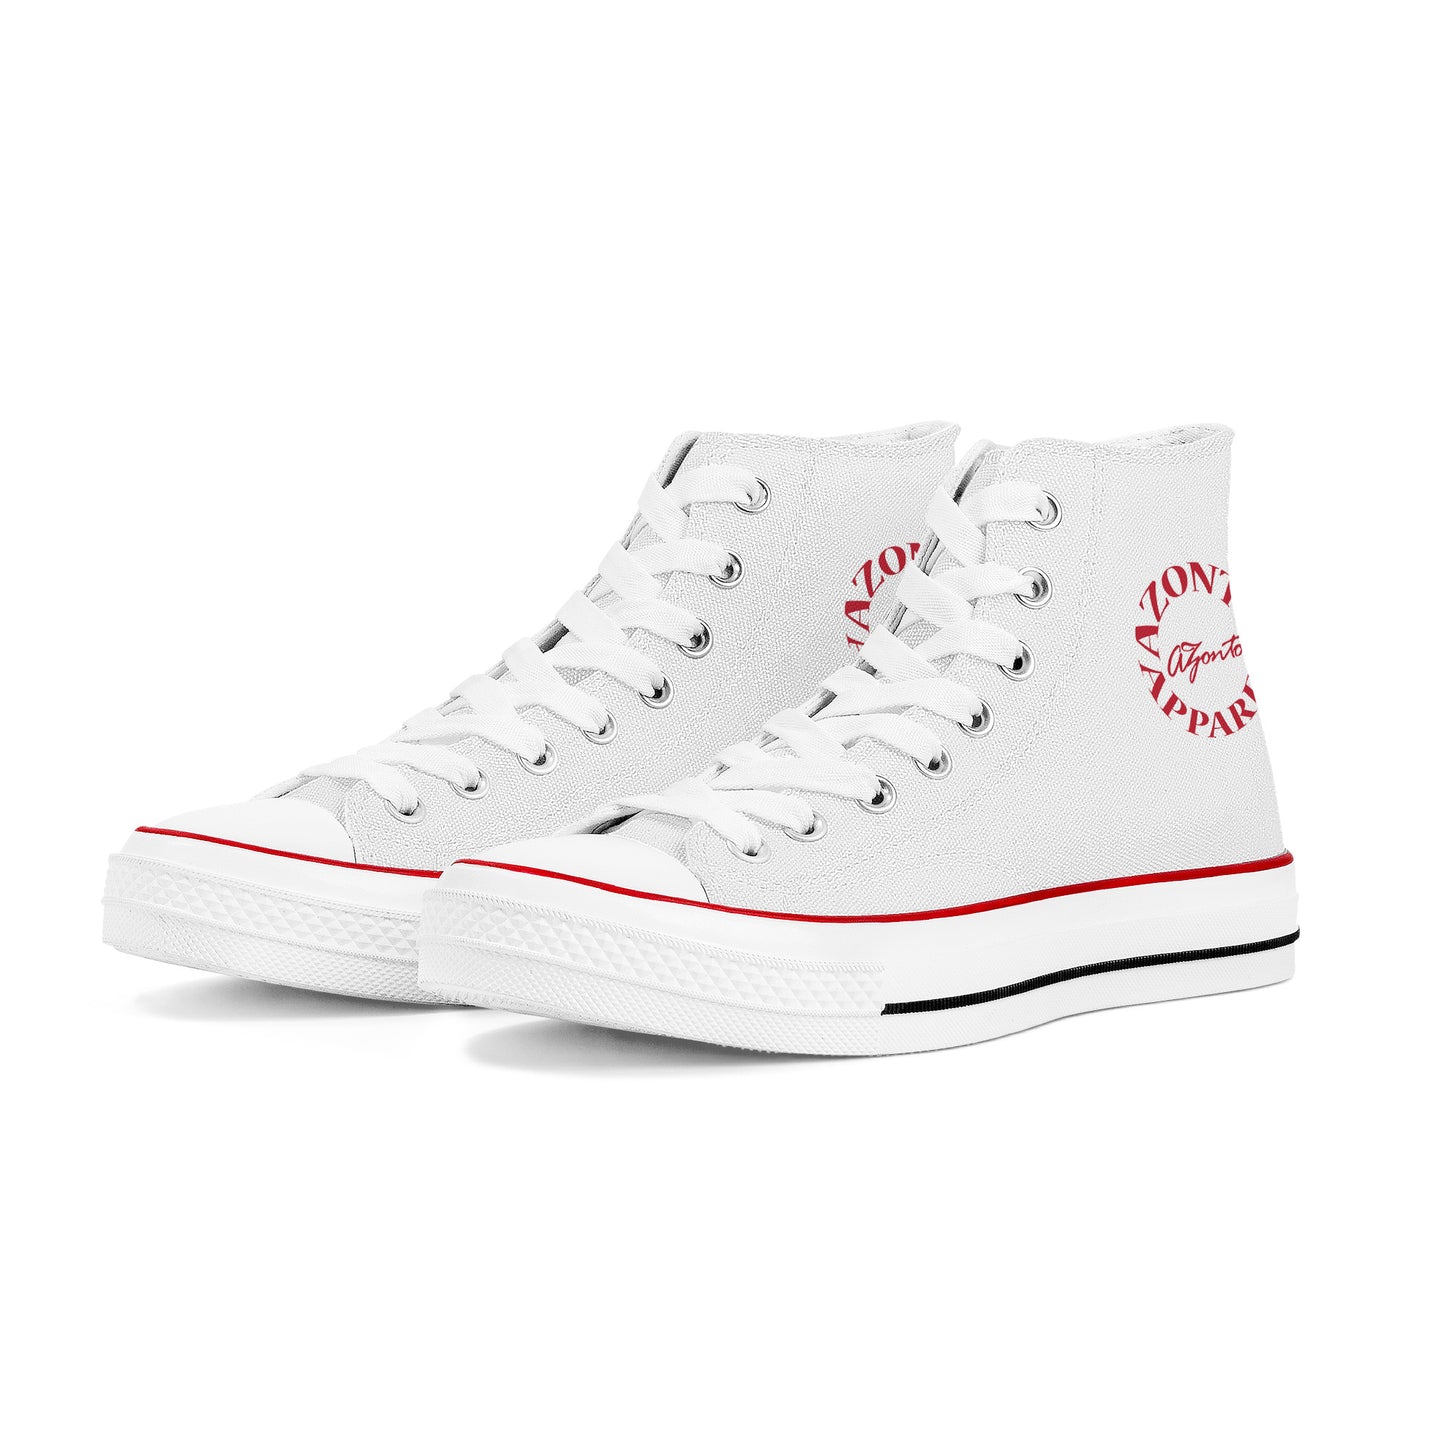 AZONTO High Top Canvas Shoes - White